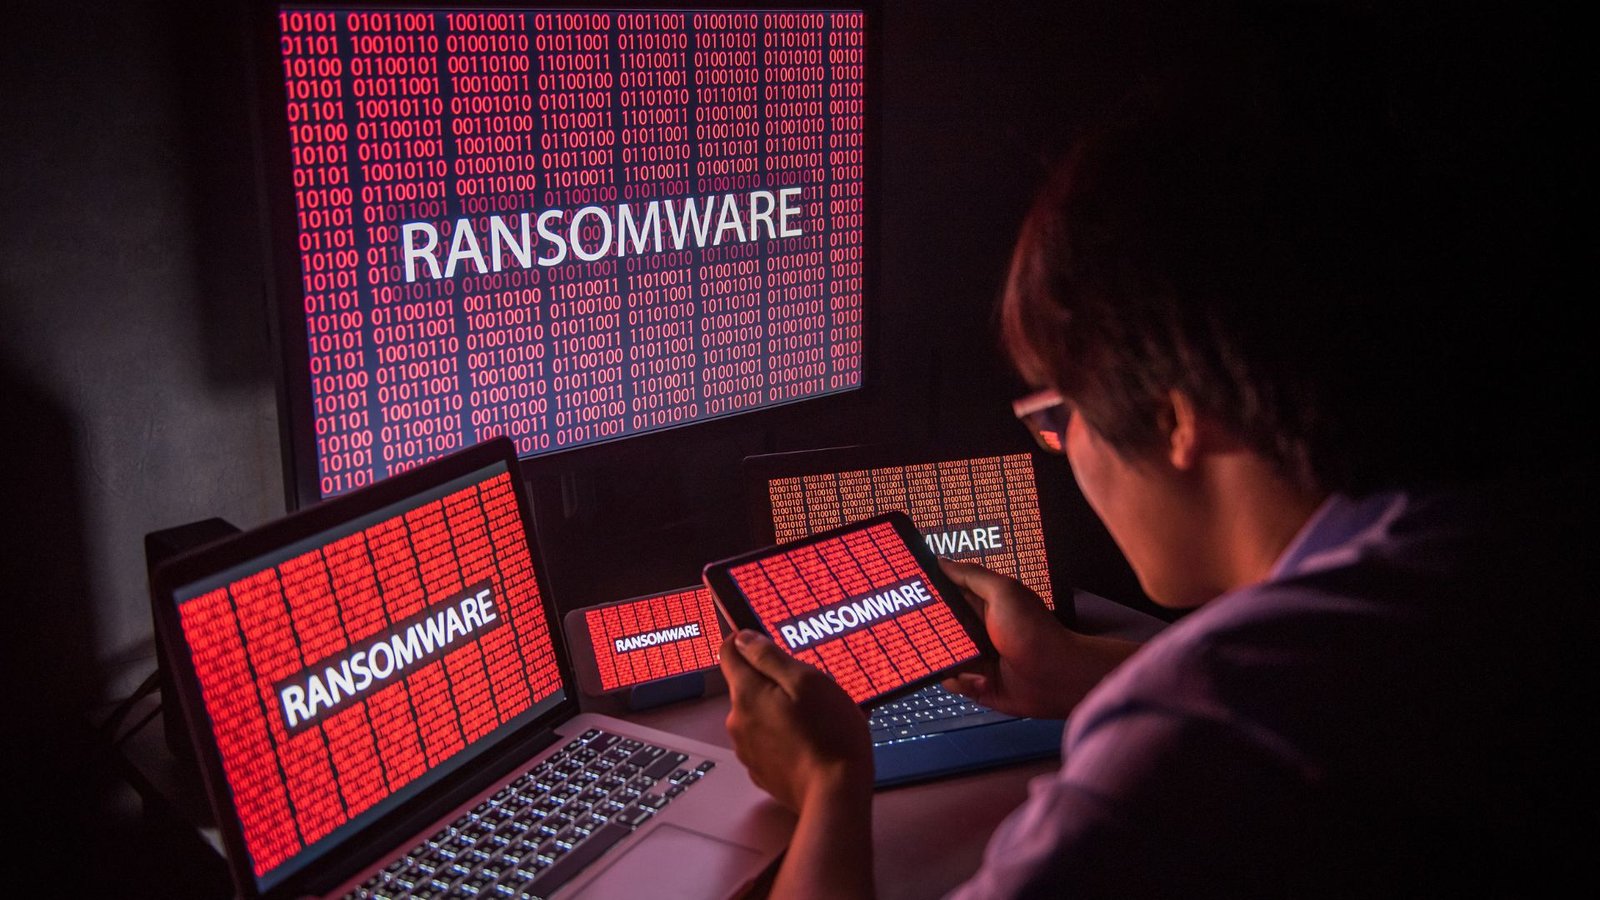 Ransomware Attack, Lawforeverything